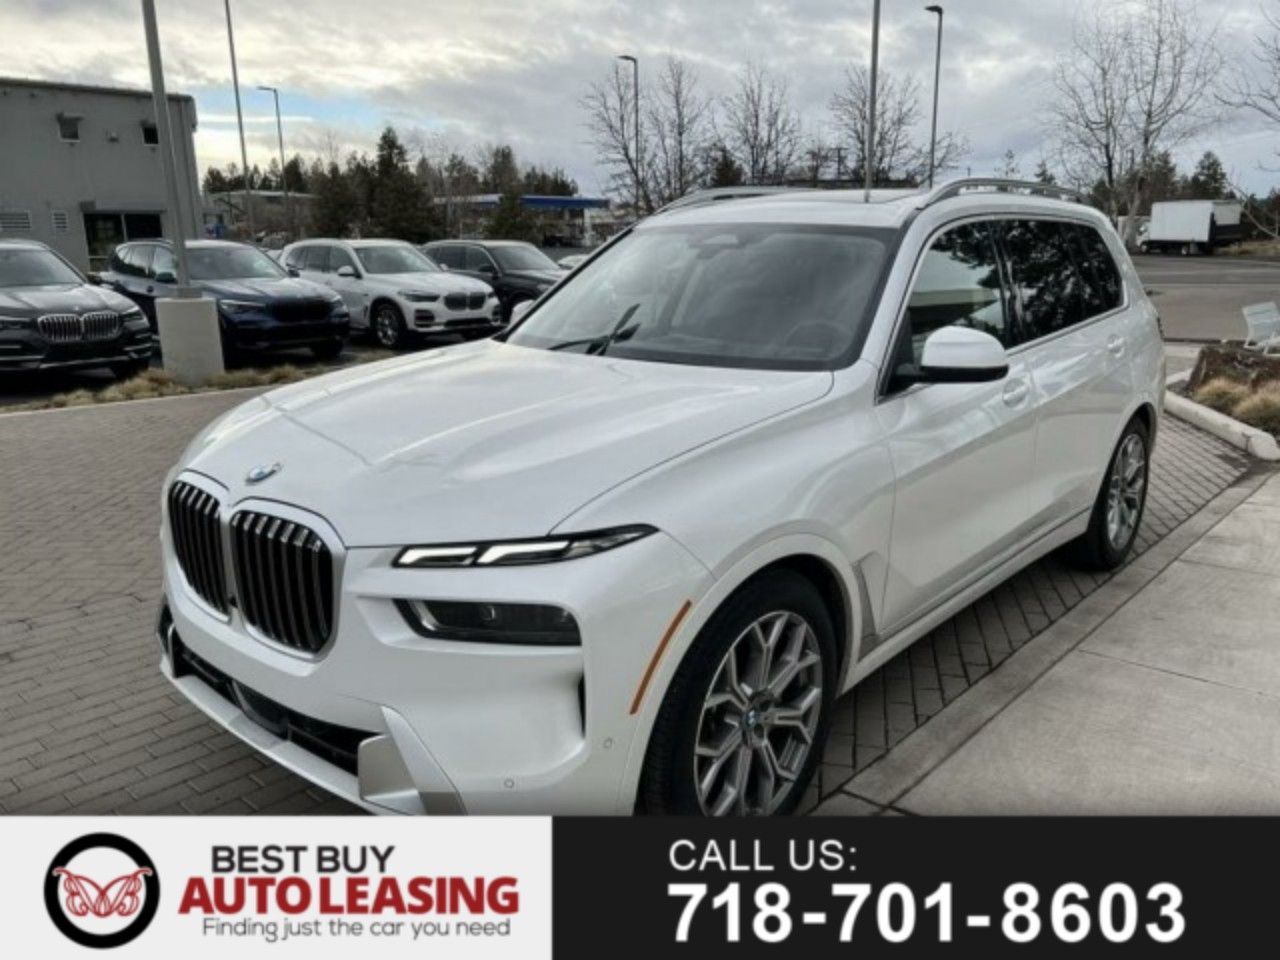 New 2023 BMW X7 xDrive40i SUV 10 25 11201 Automatic located in